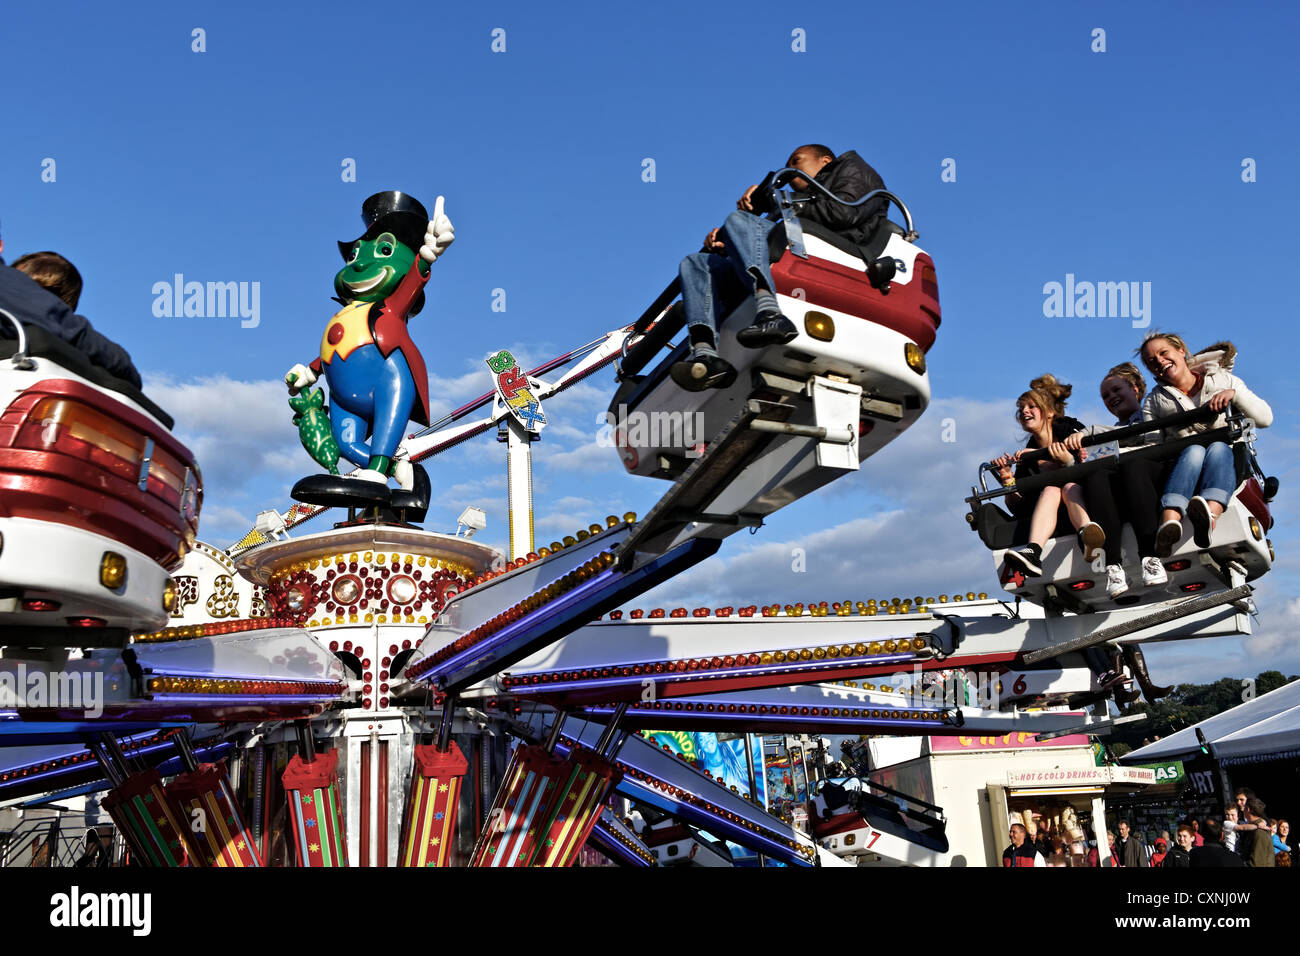 Young people enjoying a fairground ride at Nottingham's historic Goose Fair Stock Photo